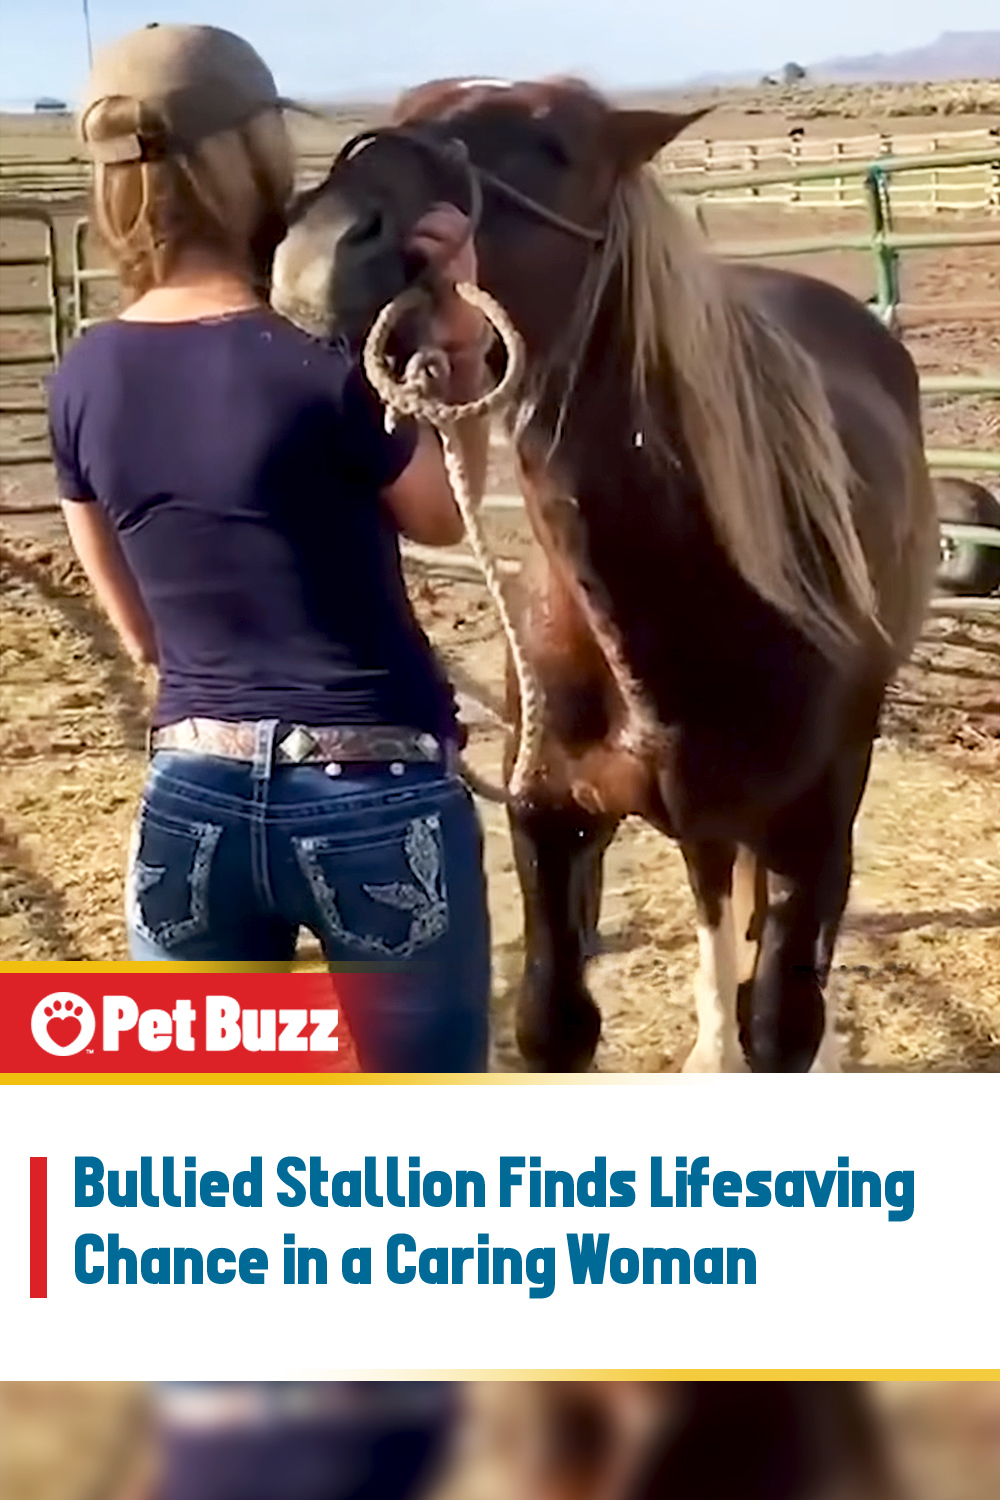 Bullied Stallion Finds Lifesaving Chance in a Caring Woman